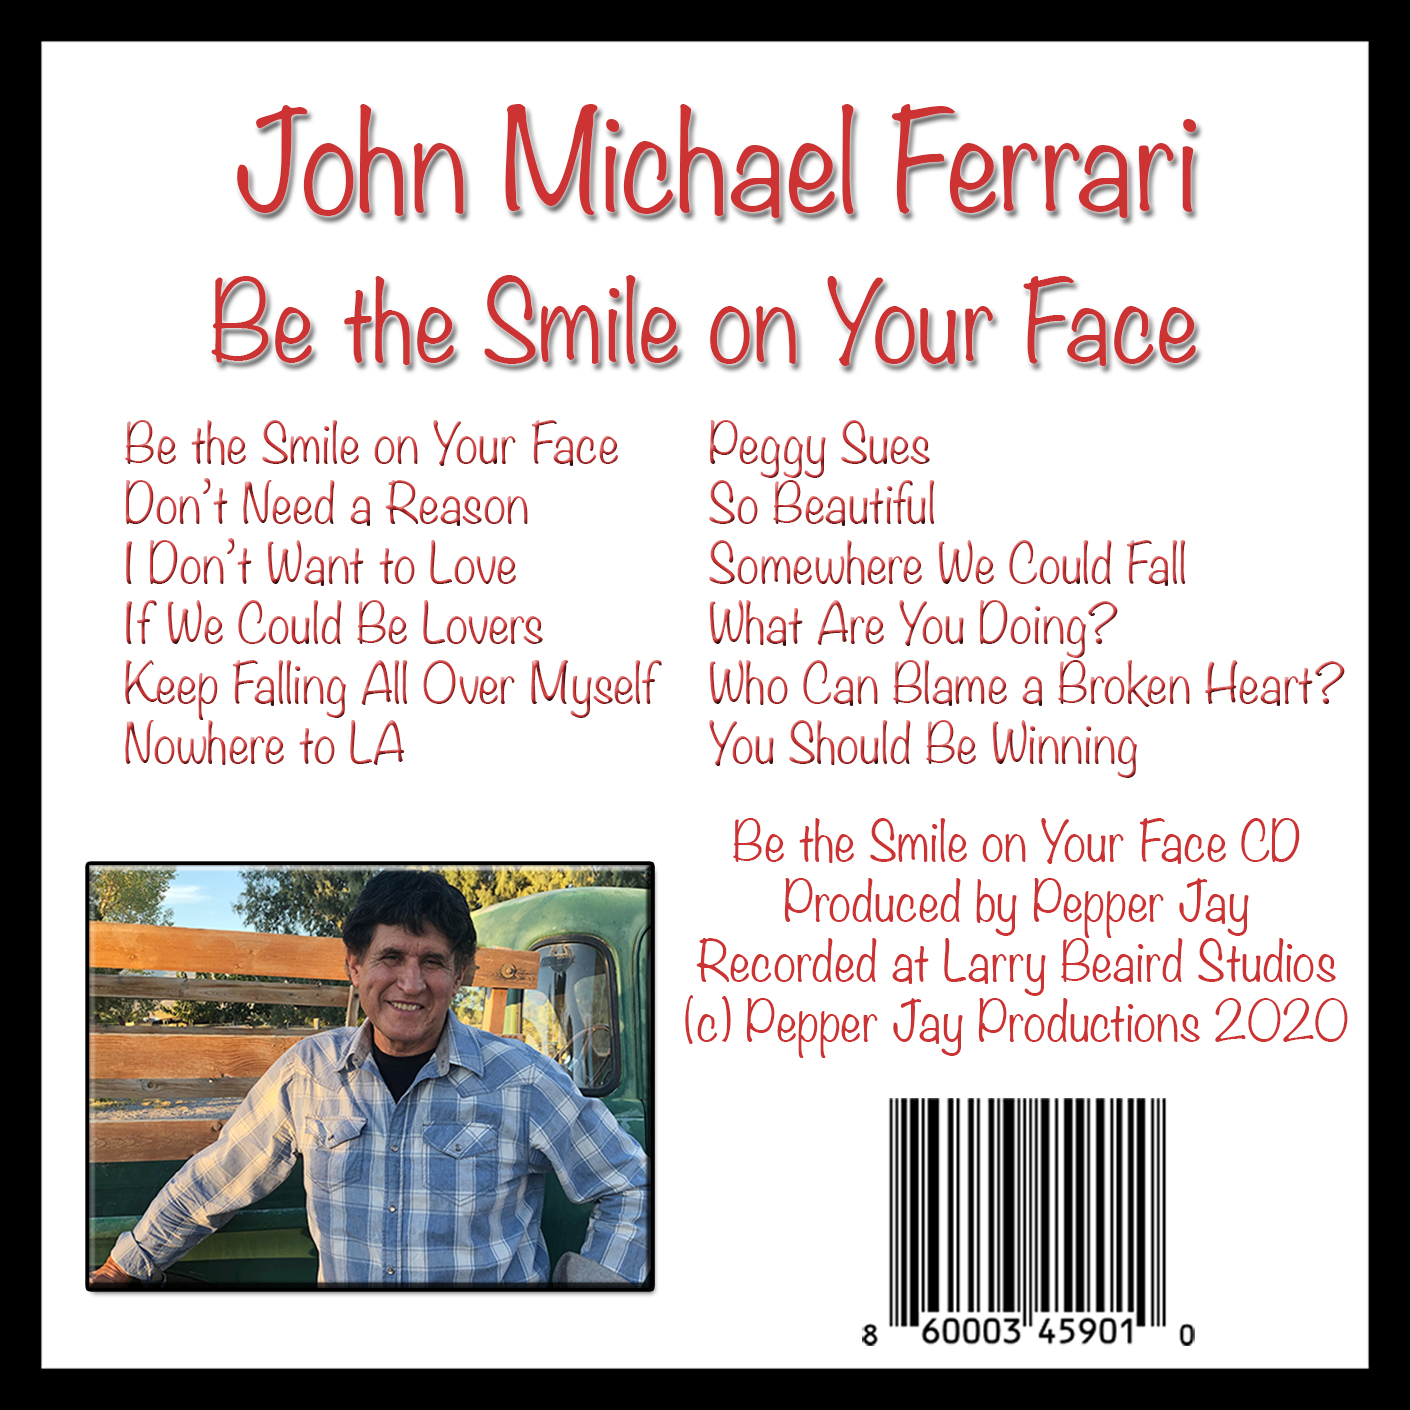 Be the Smile on Your Face - CD back cover art